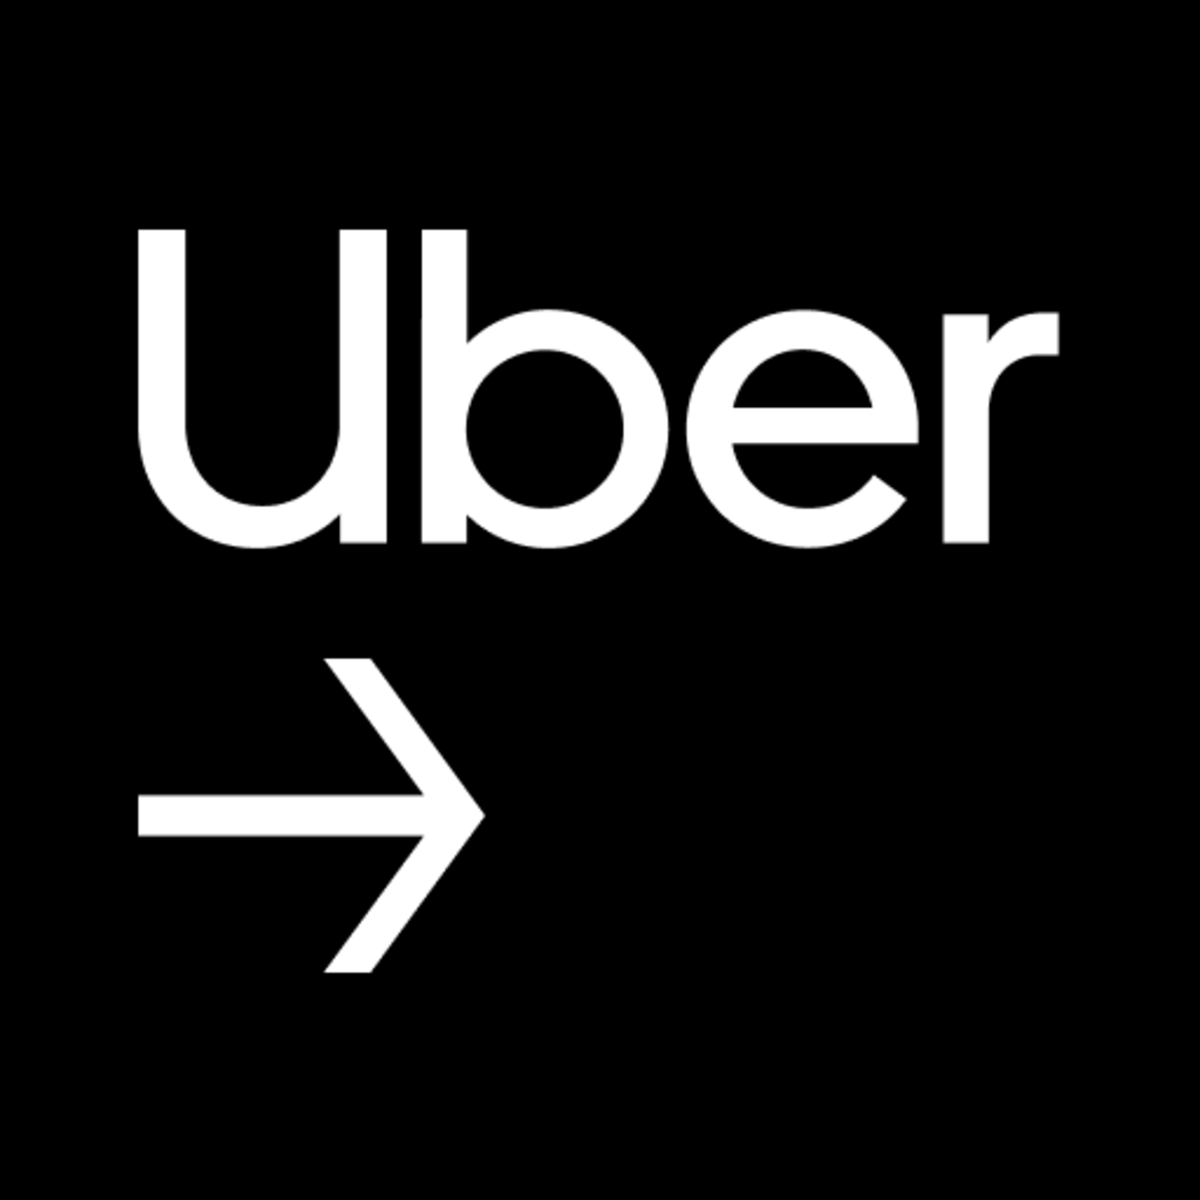 If you want to drive for a rideshare service, consider one that's not Uber.